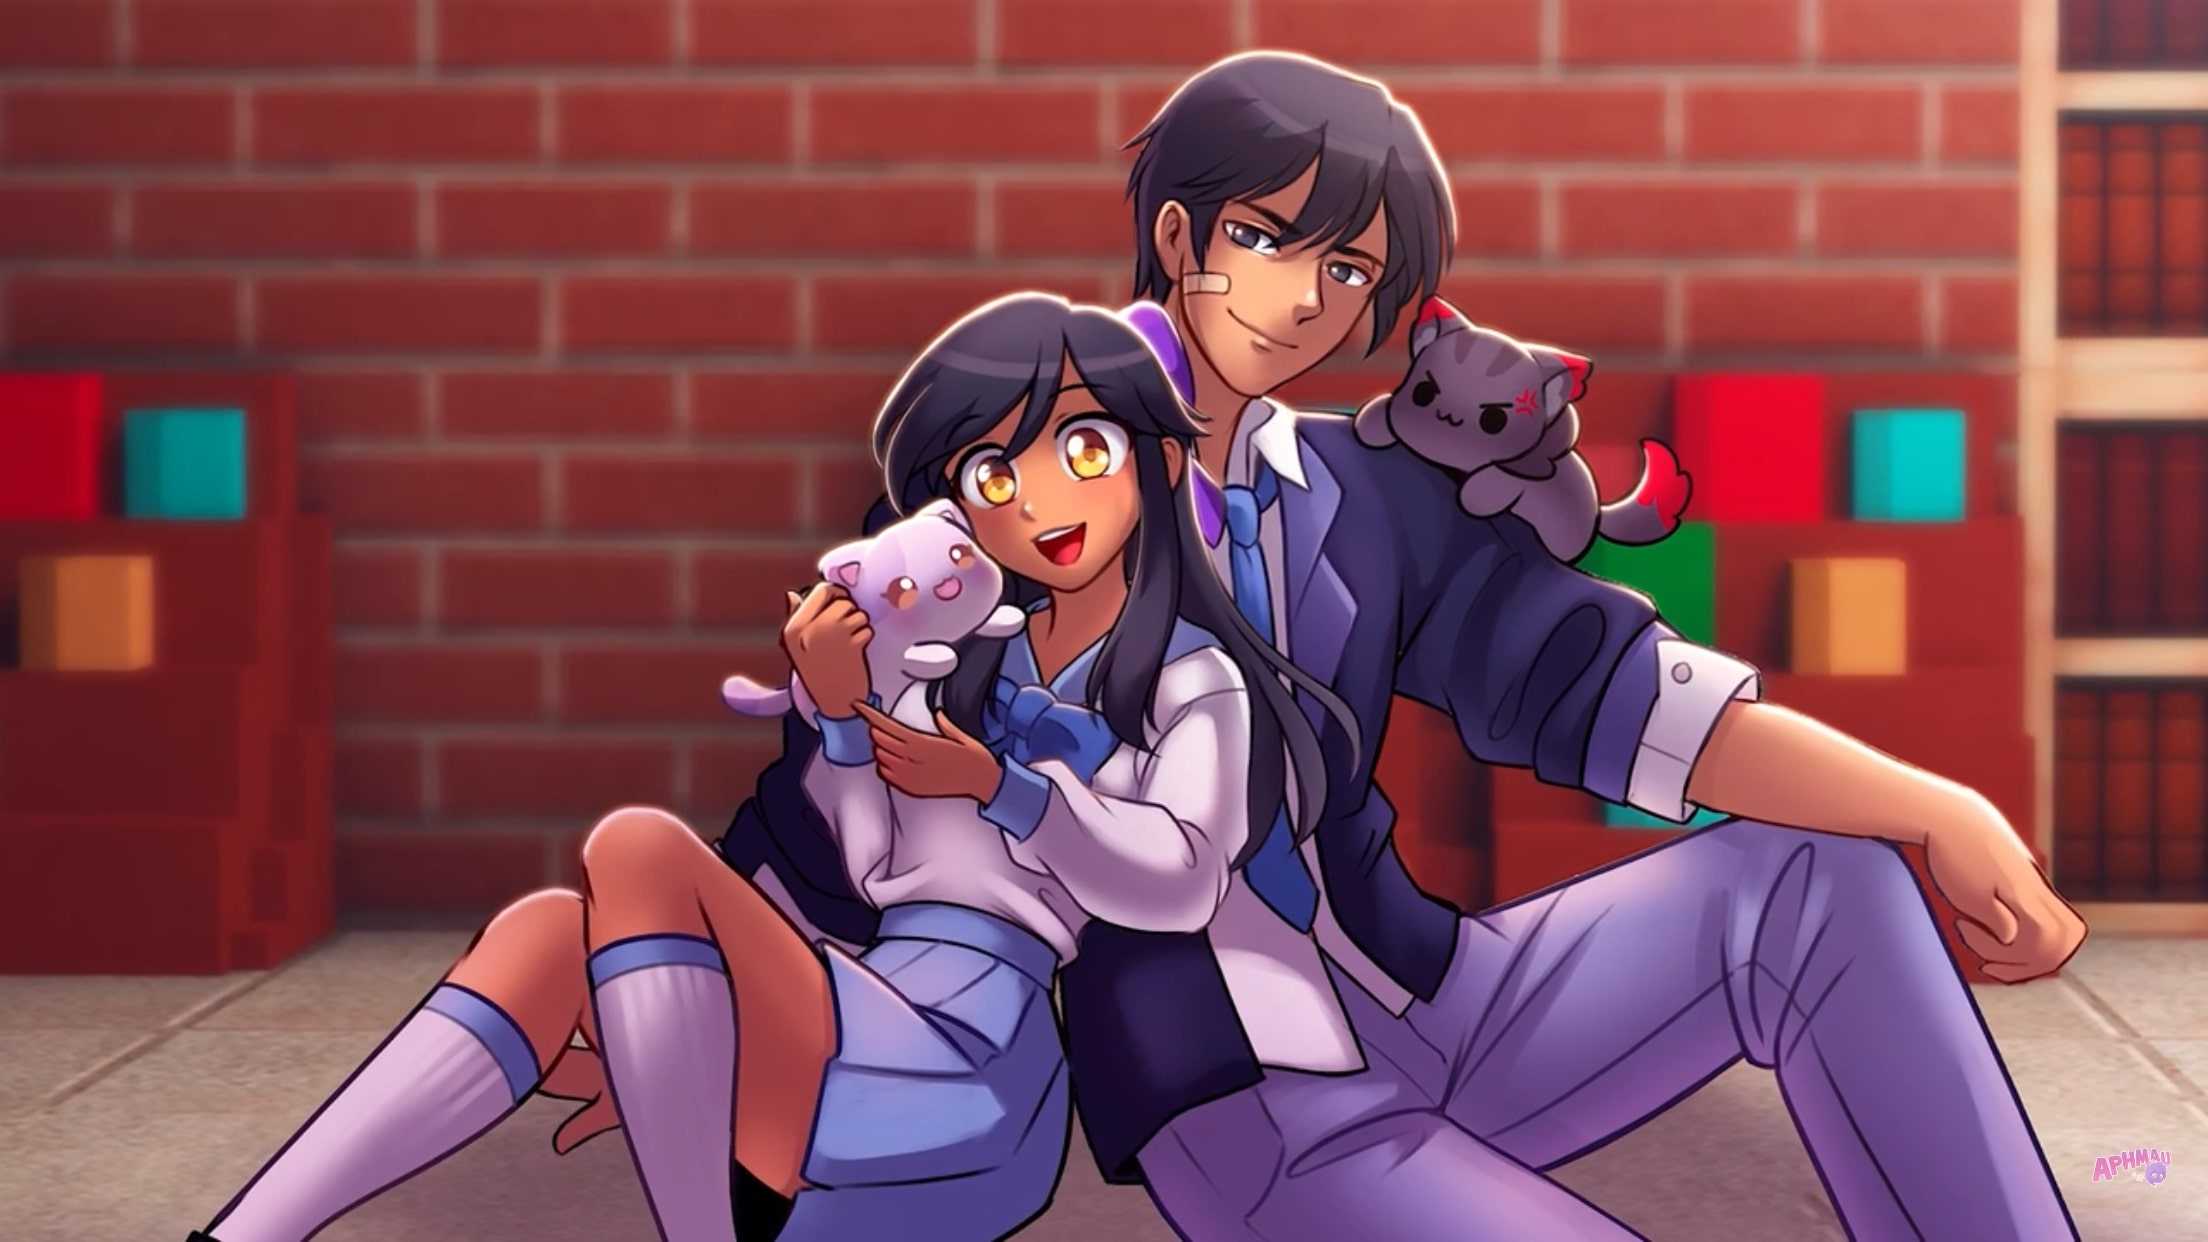 Aphmau and Aaron Wallpaper - iXpap.